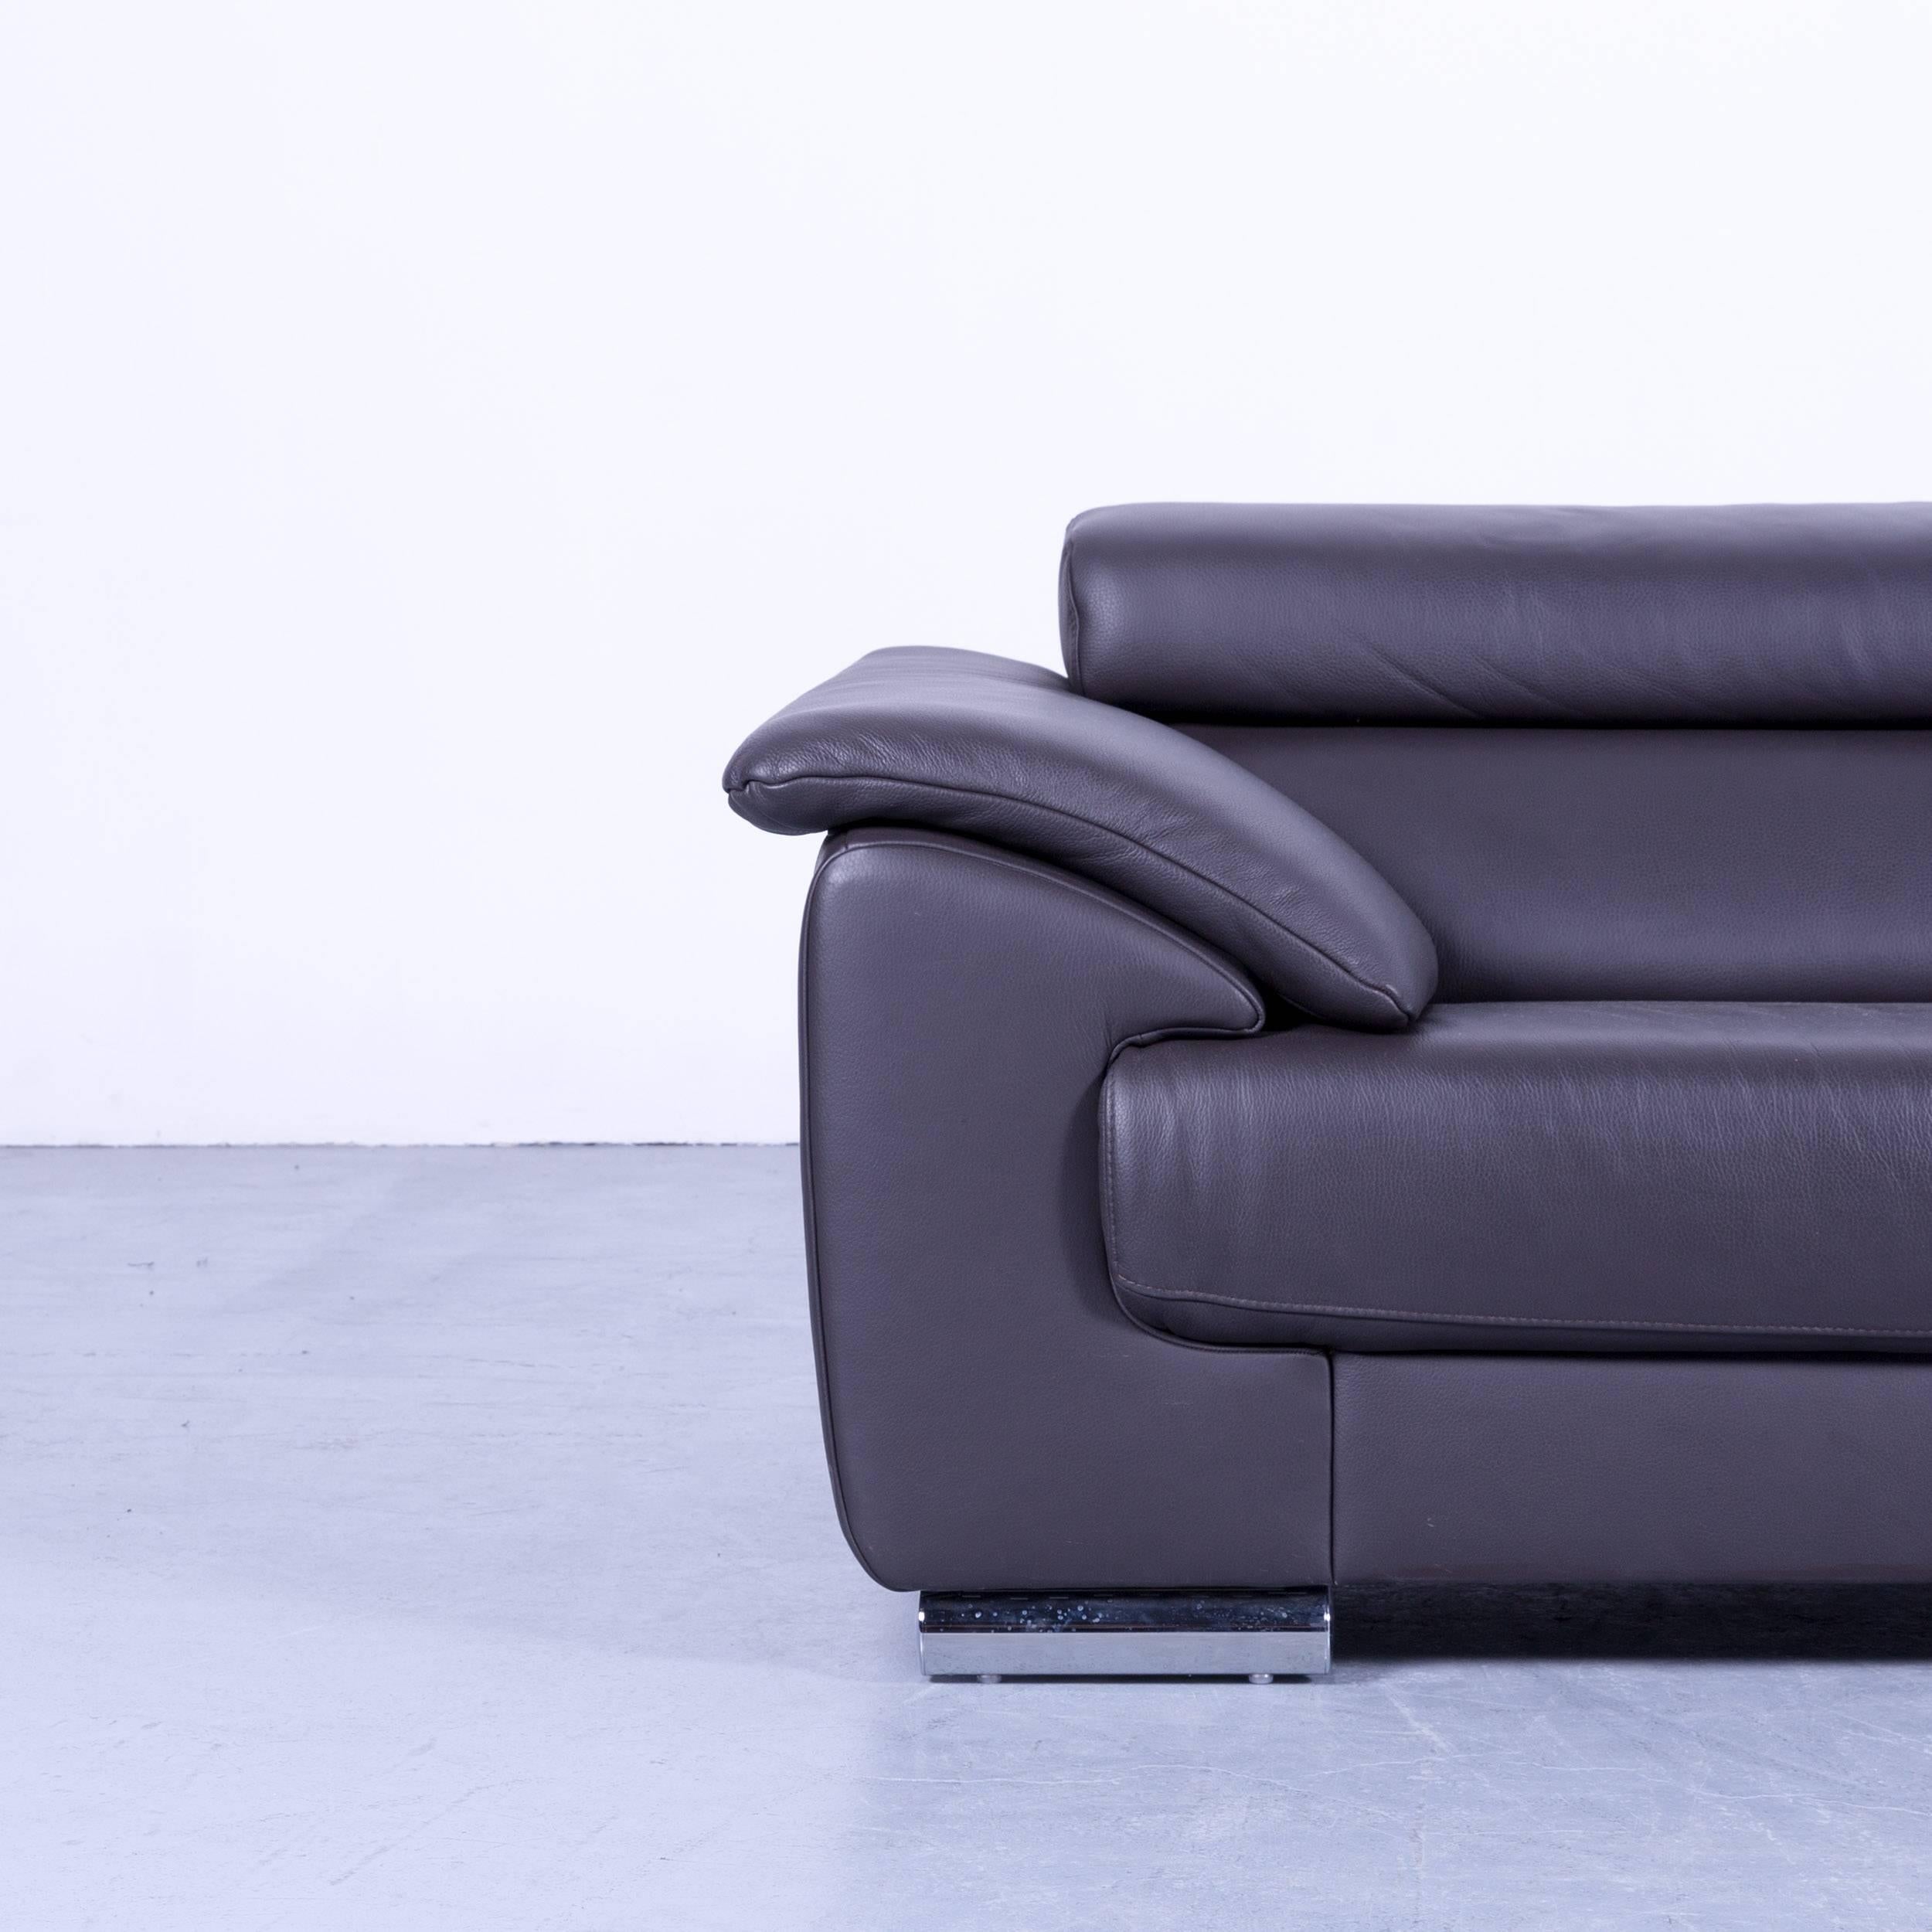 Ewald Schillig Brand Blues designer sofa anthracite grey brown leather couch, in a minimalistic and modern design, made for pure comfort and style.